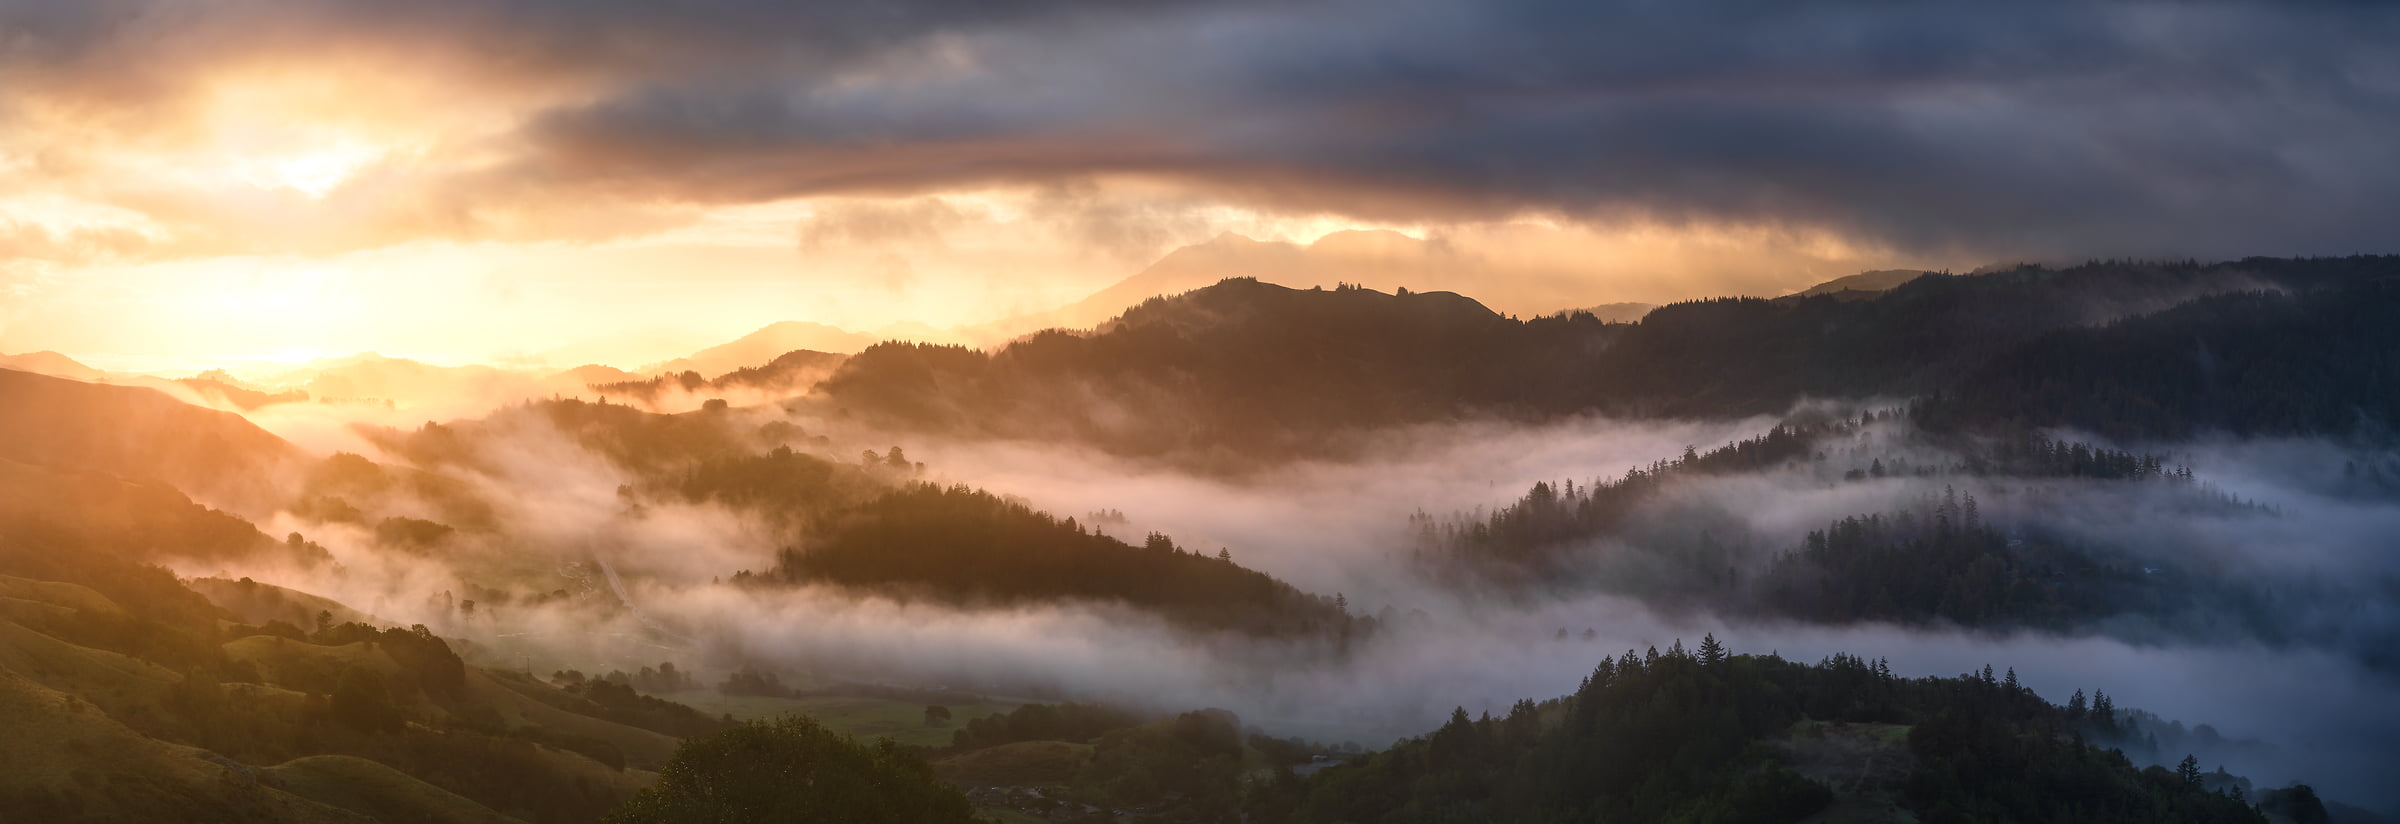 188 megapixels! A very high resolution, large-format VAST photo print of an inspirational sunrise with hills, fog, and clouds; landscape photograph created by Jeff Lewis in Marin County, California